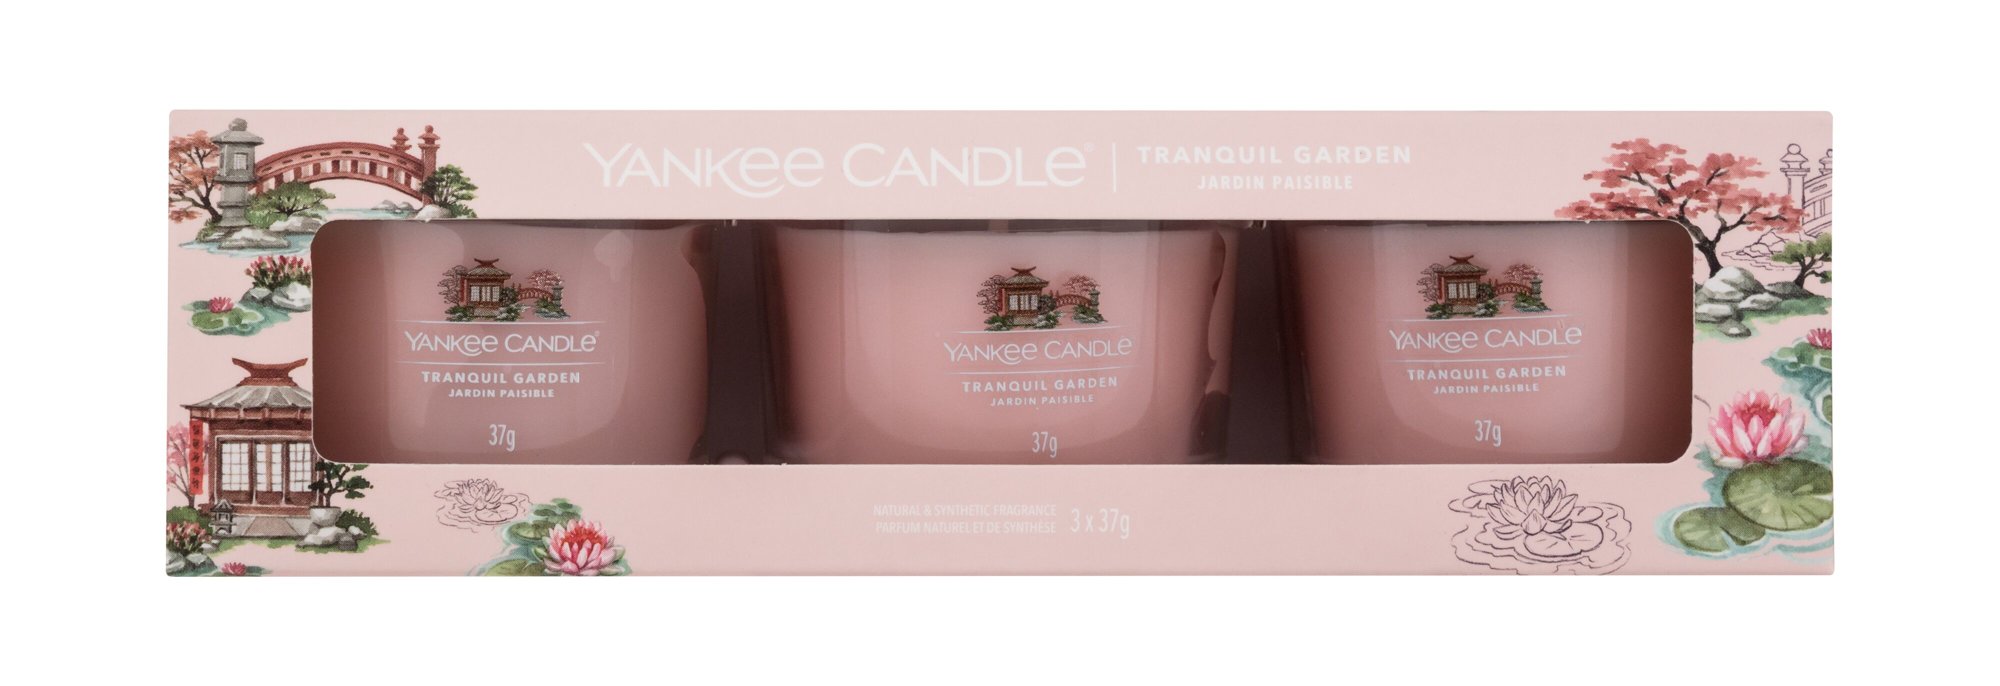 Yankee Candle Tranquil Garden 37g Scented Candle 3 x 37 g Kvepalai Unisex Scented Candle Rinkinys